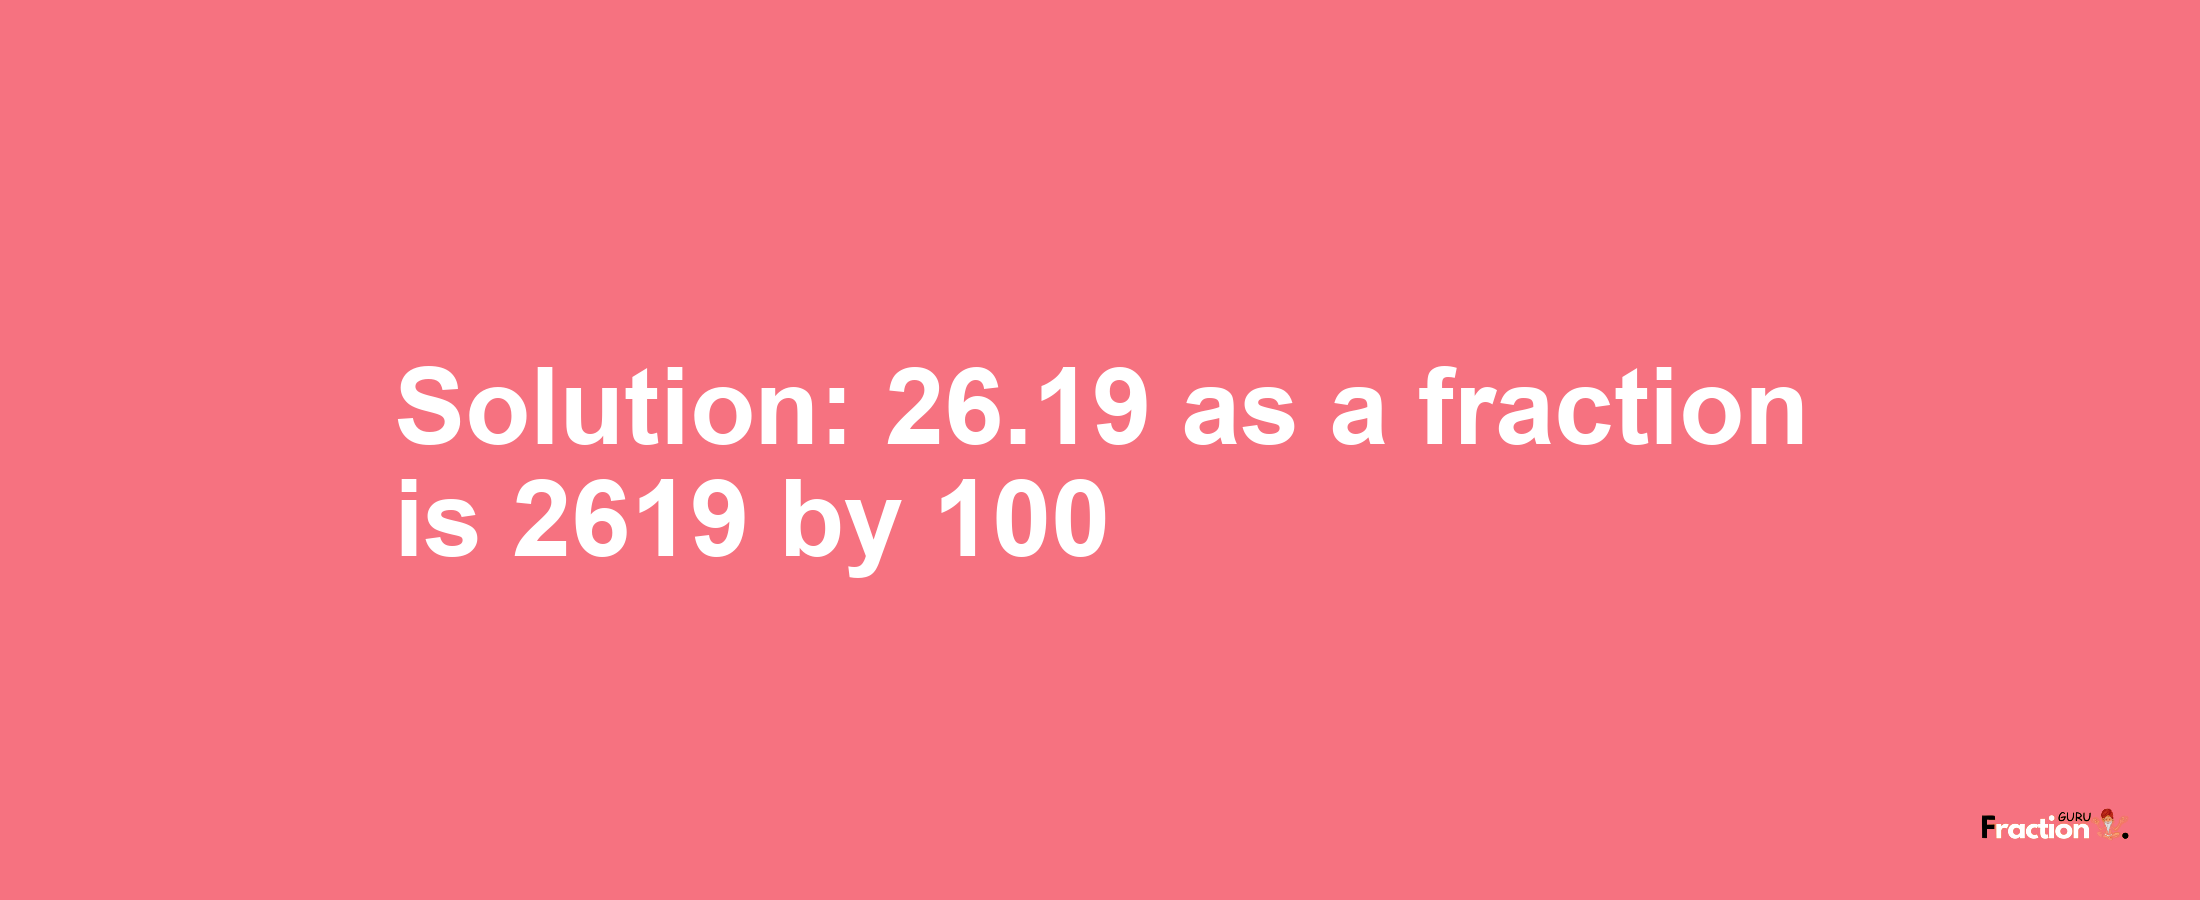 Solution:26.19 as a fraction is 2619/100